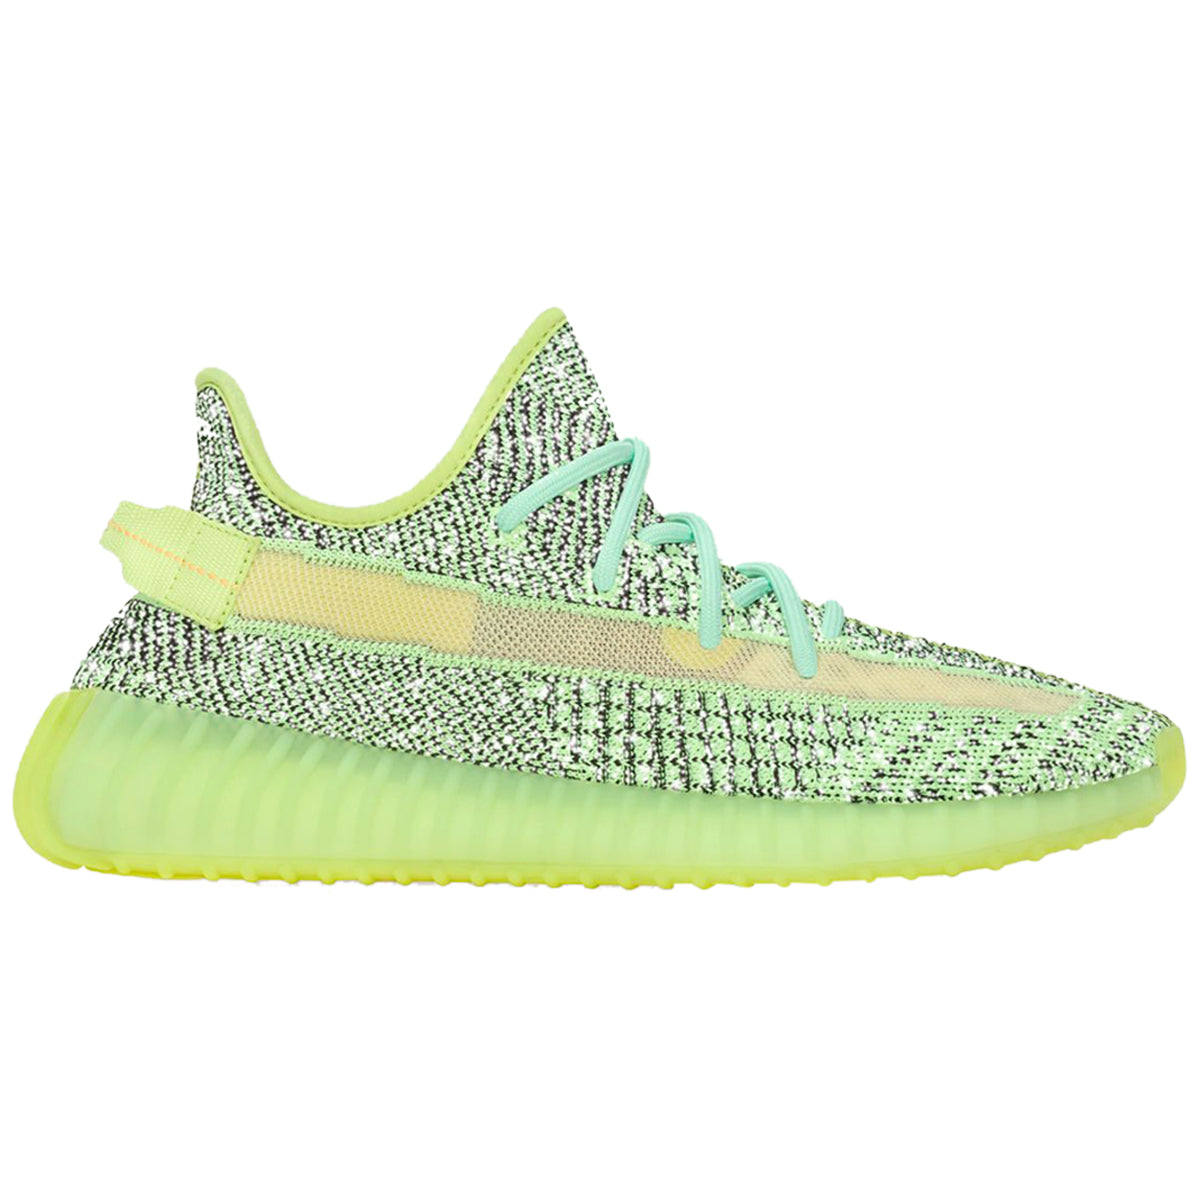 Adidas Yeezy Boost 350 V2 Mens Style : Fx4130